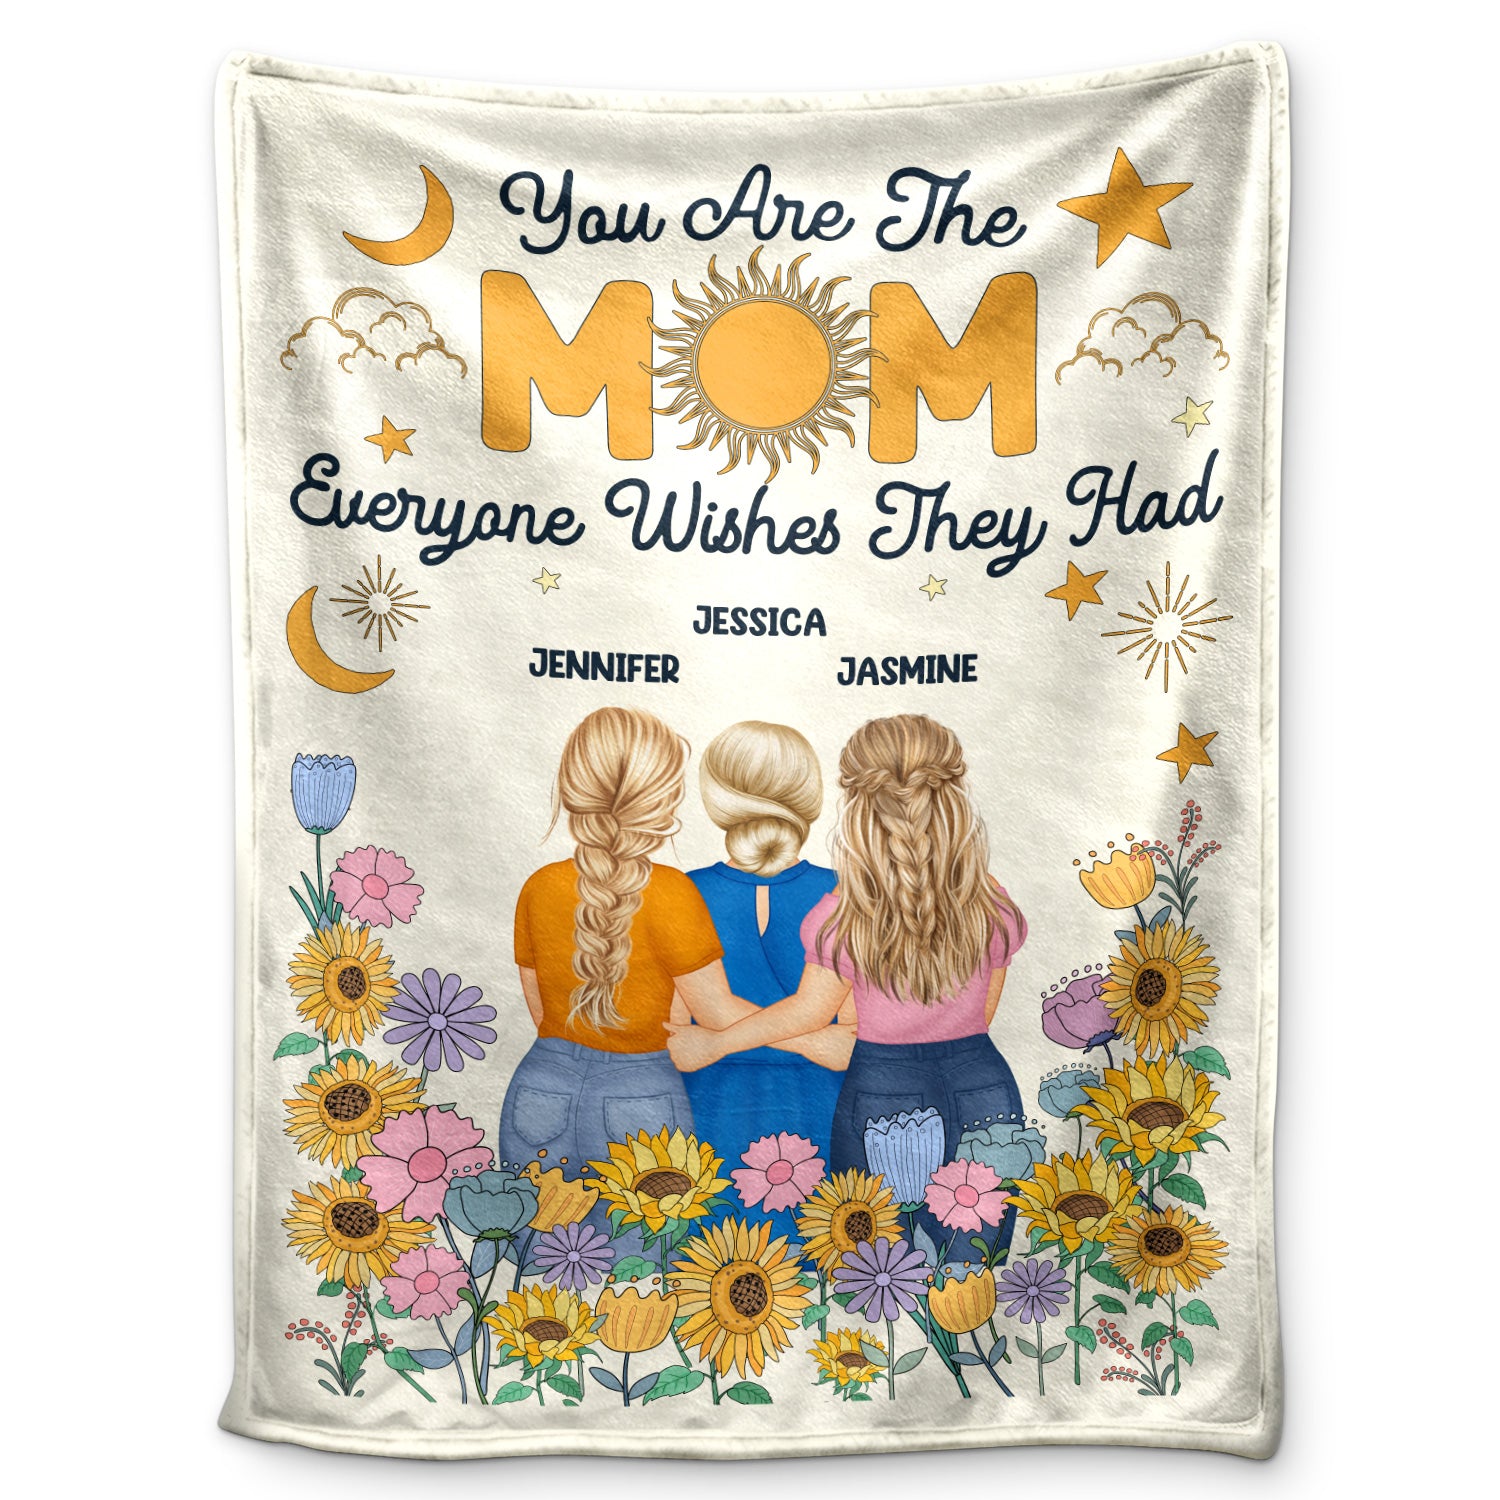 Everyone Wishes They Had - Gift For Mother - Personalized Fleece Blanket, Sherpa Blanket